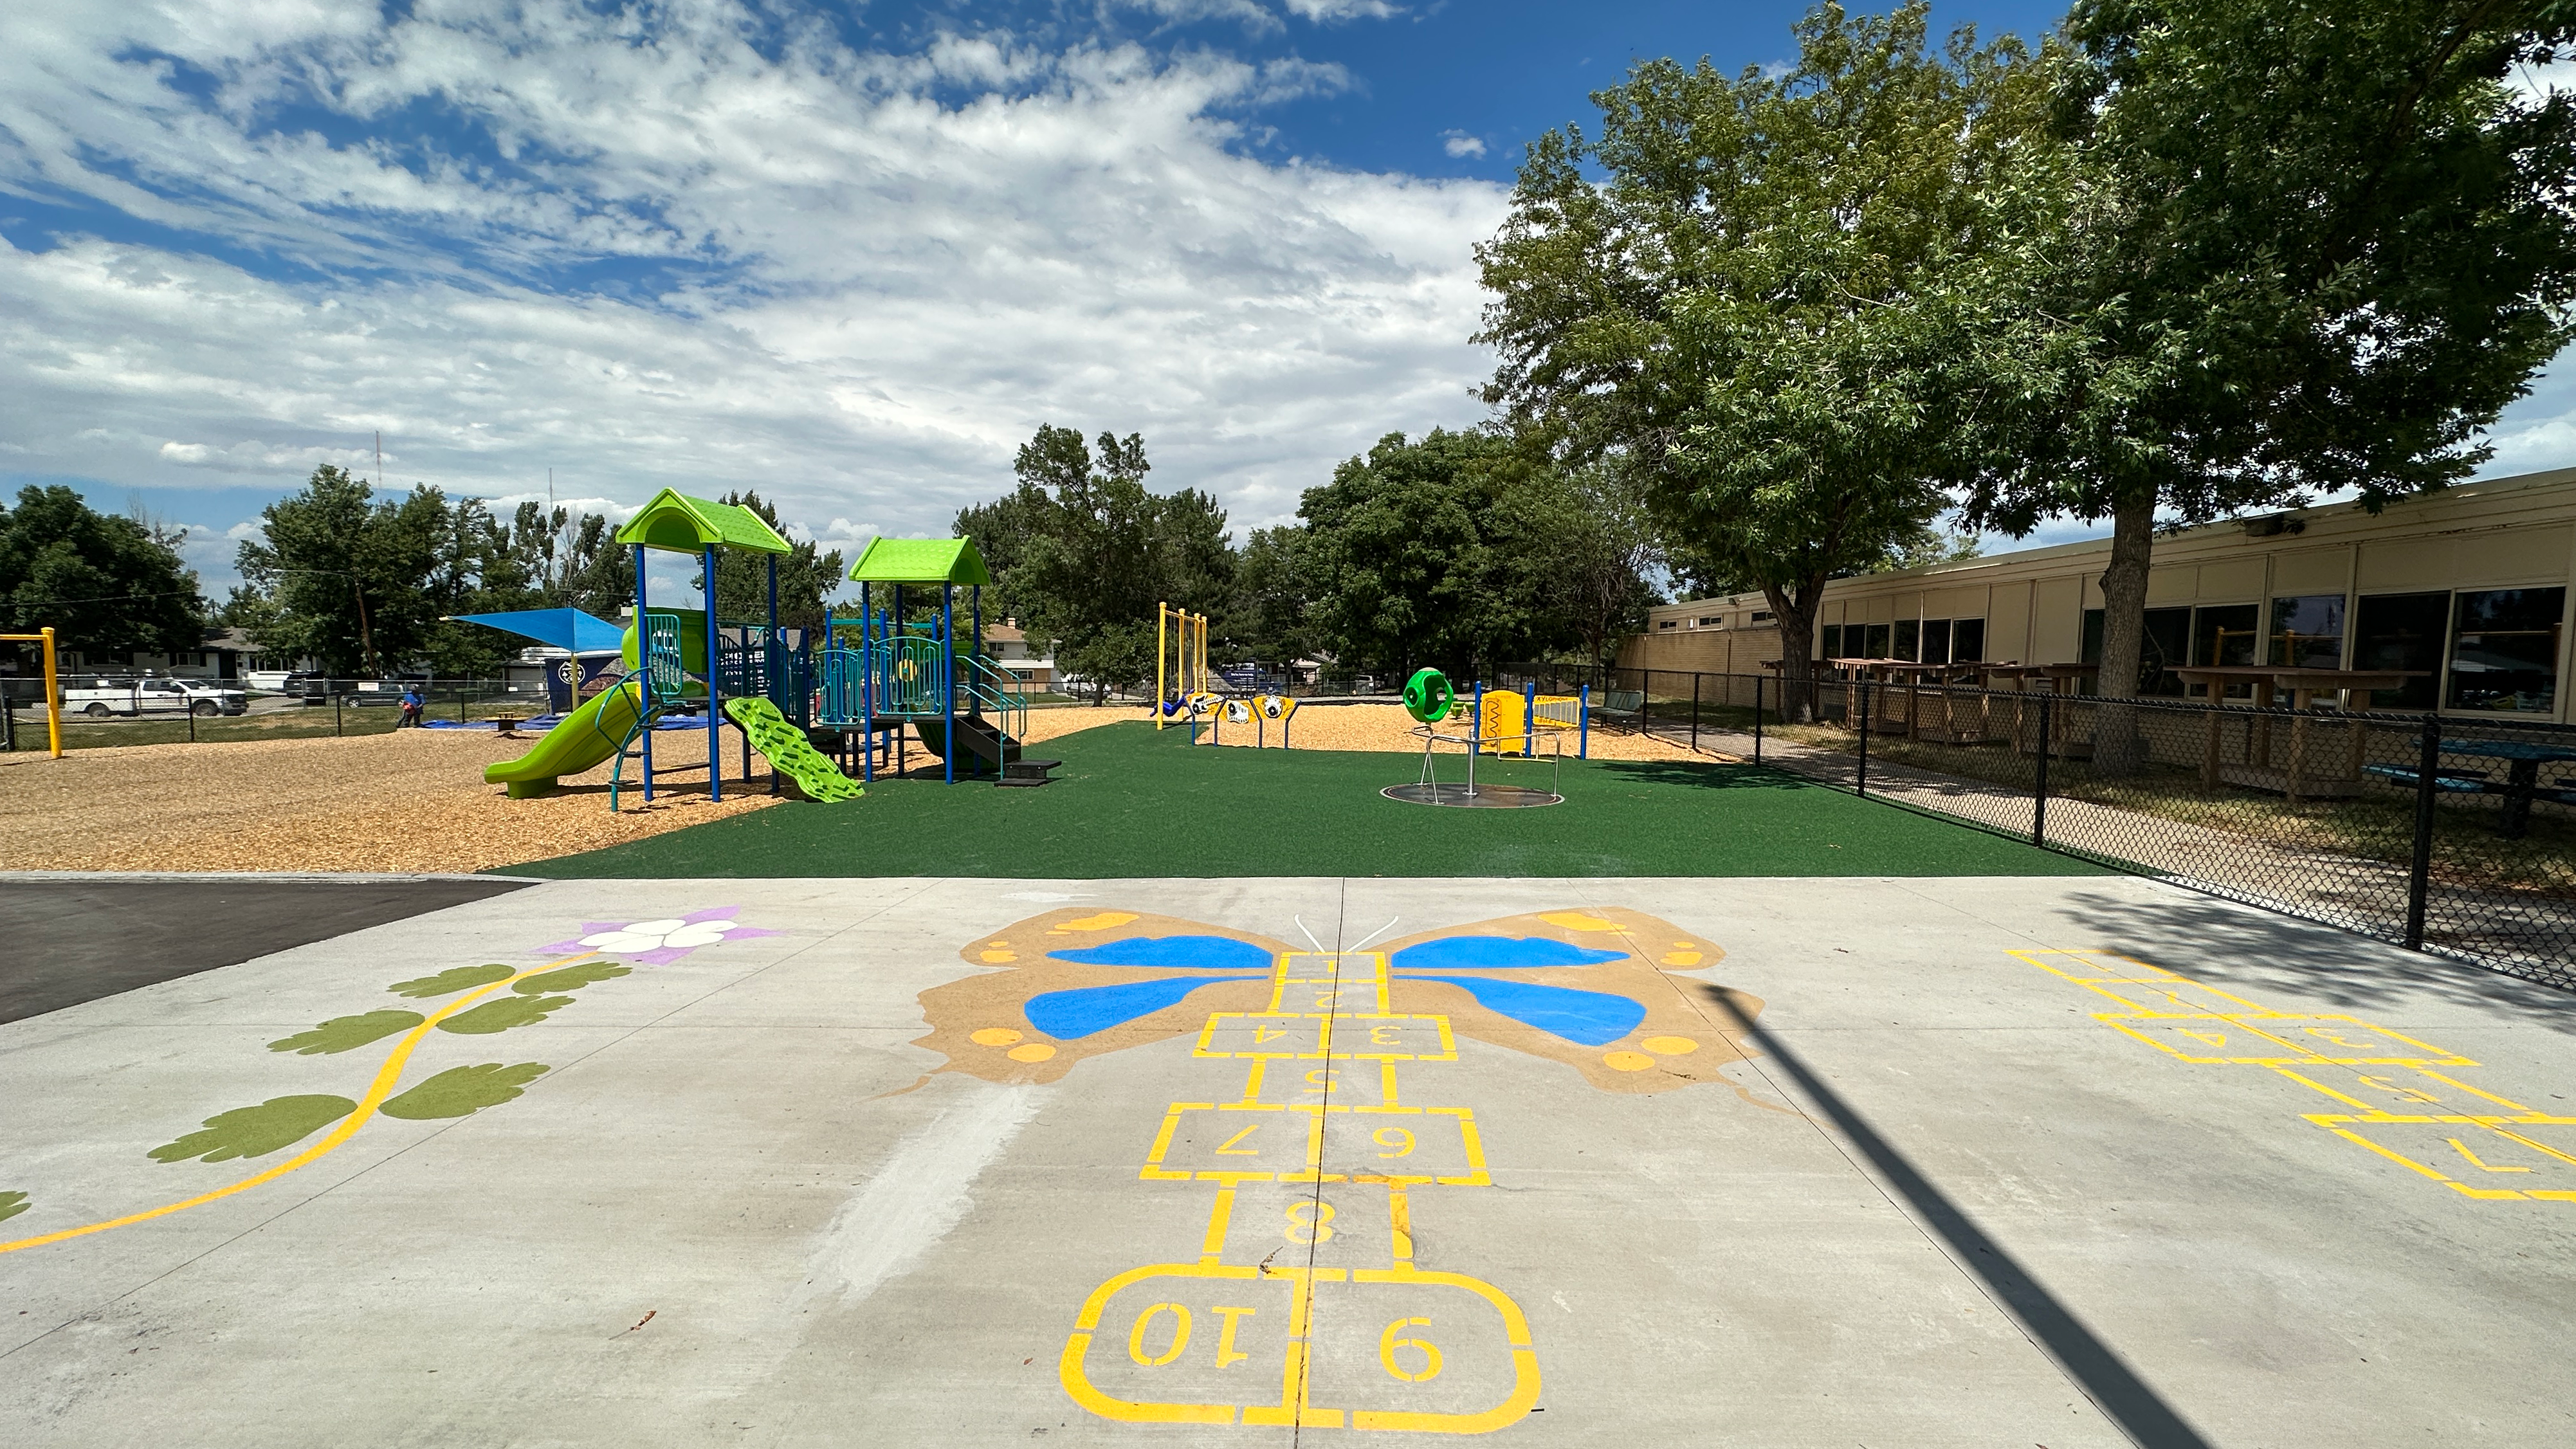 Wide shot of the playground at The Village including hopscotch and jungle gym